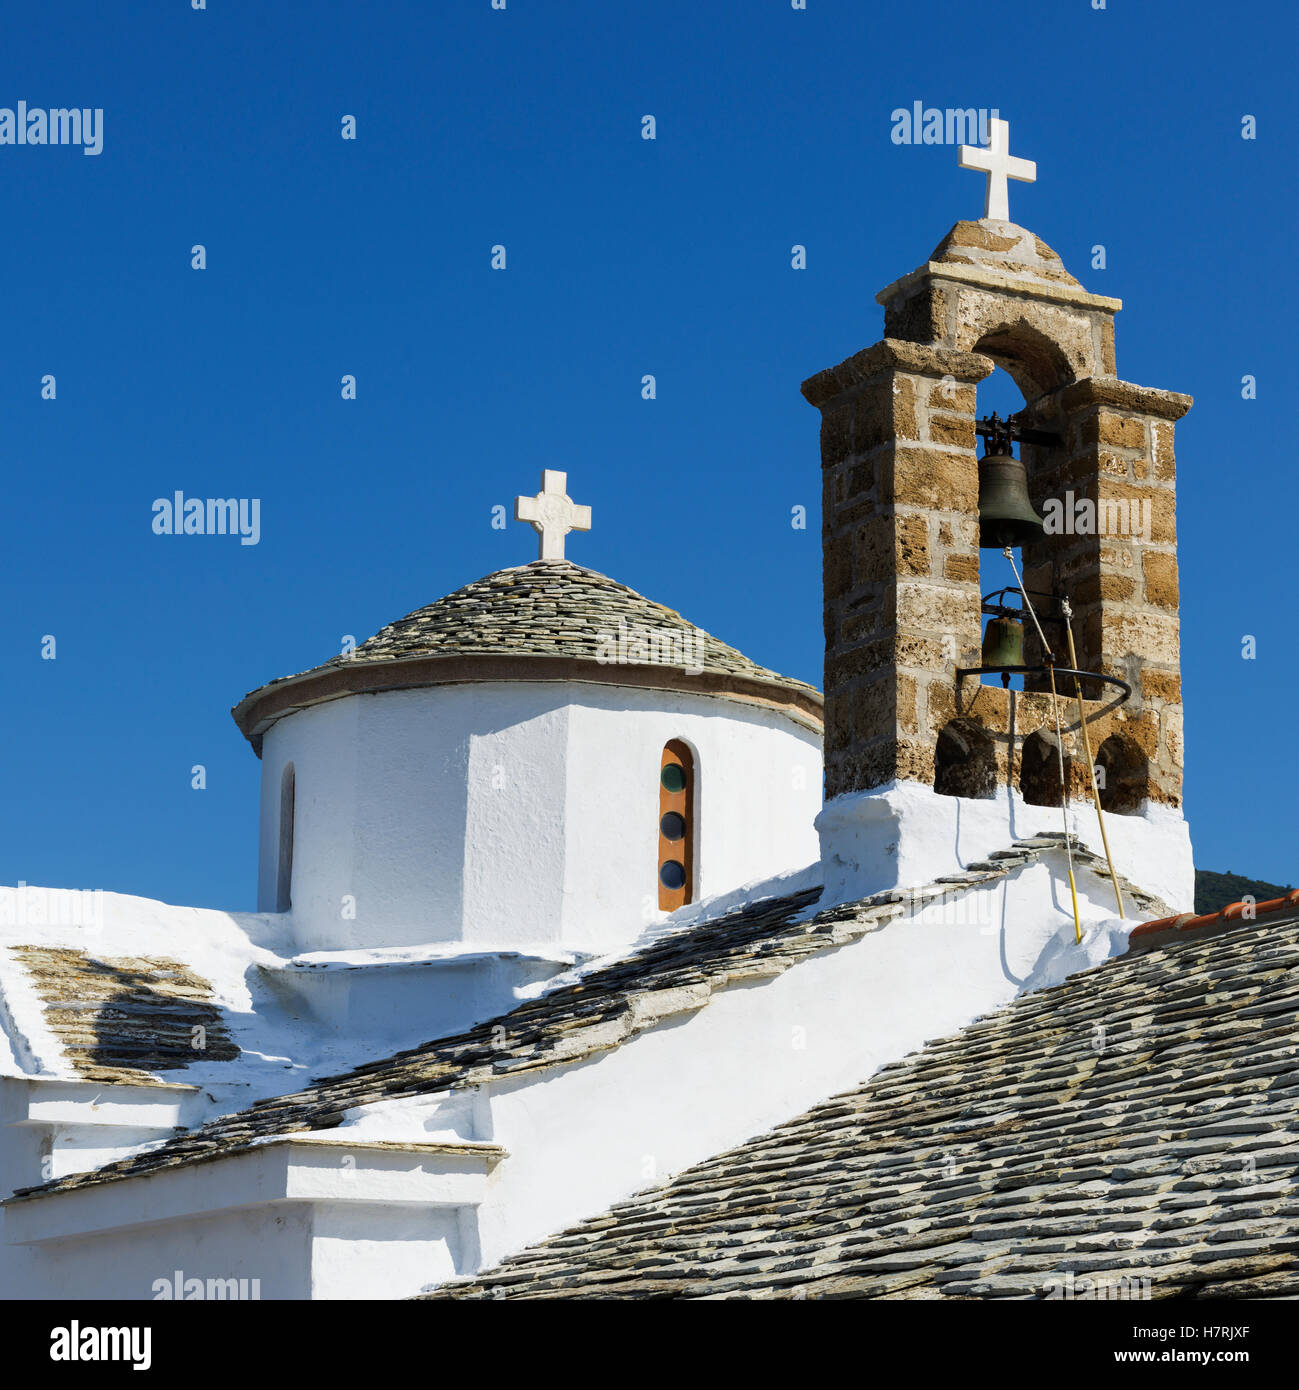 A church building with crosses and bells on the rooftop; Panormos, Skopelos, Greece Stock Photo